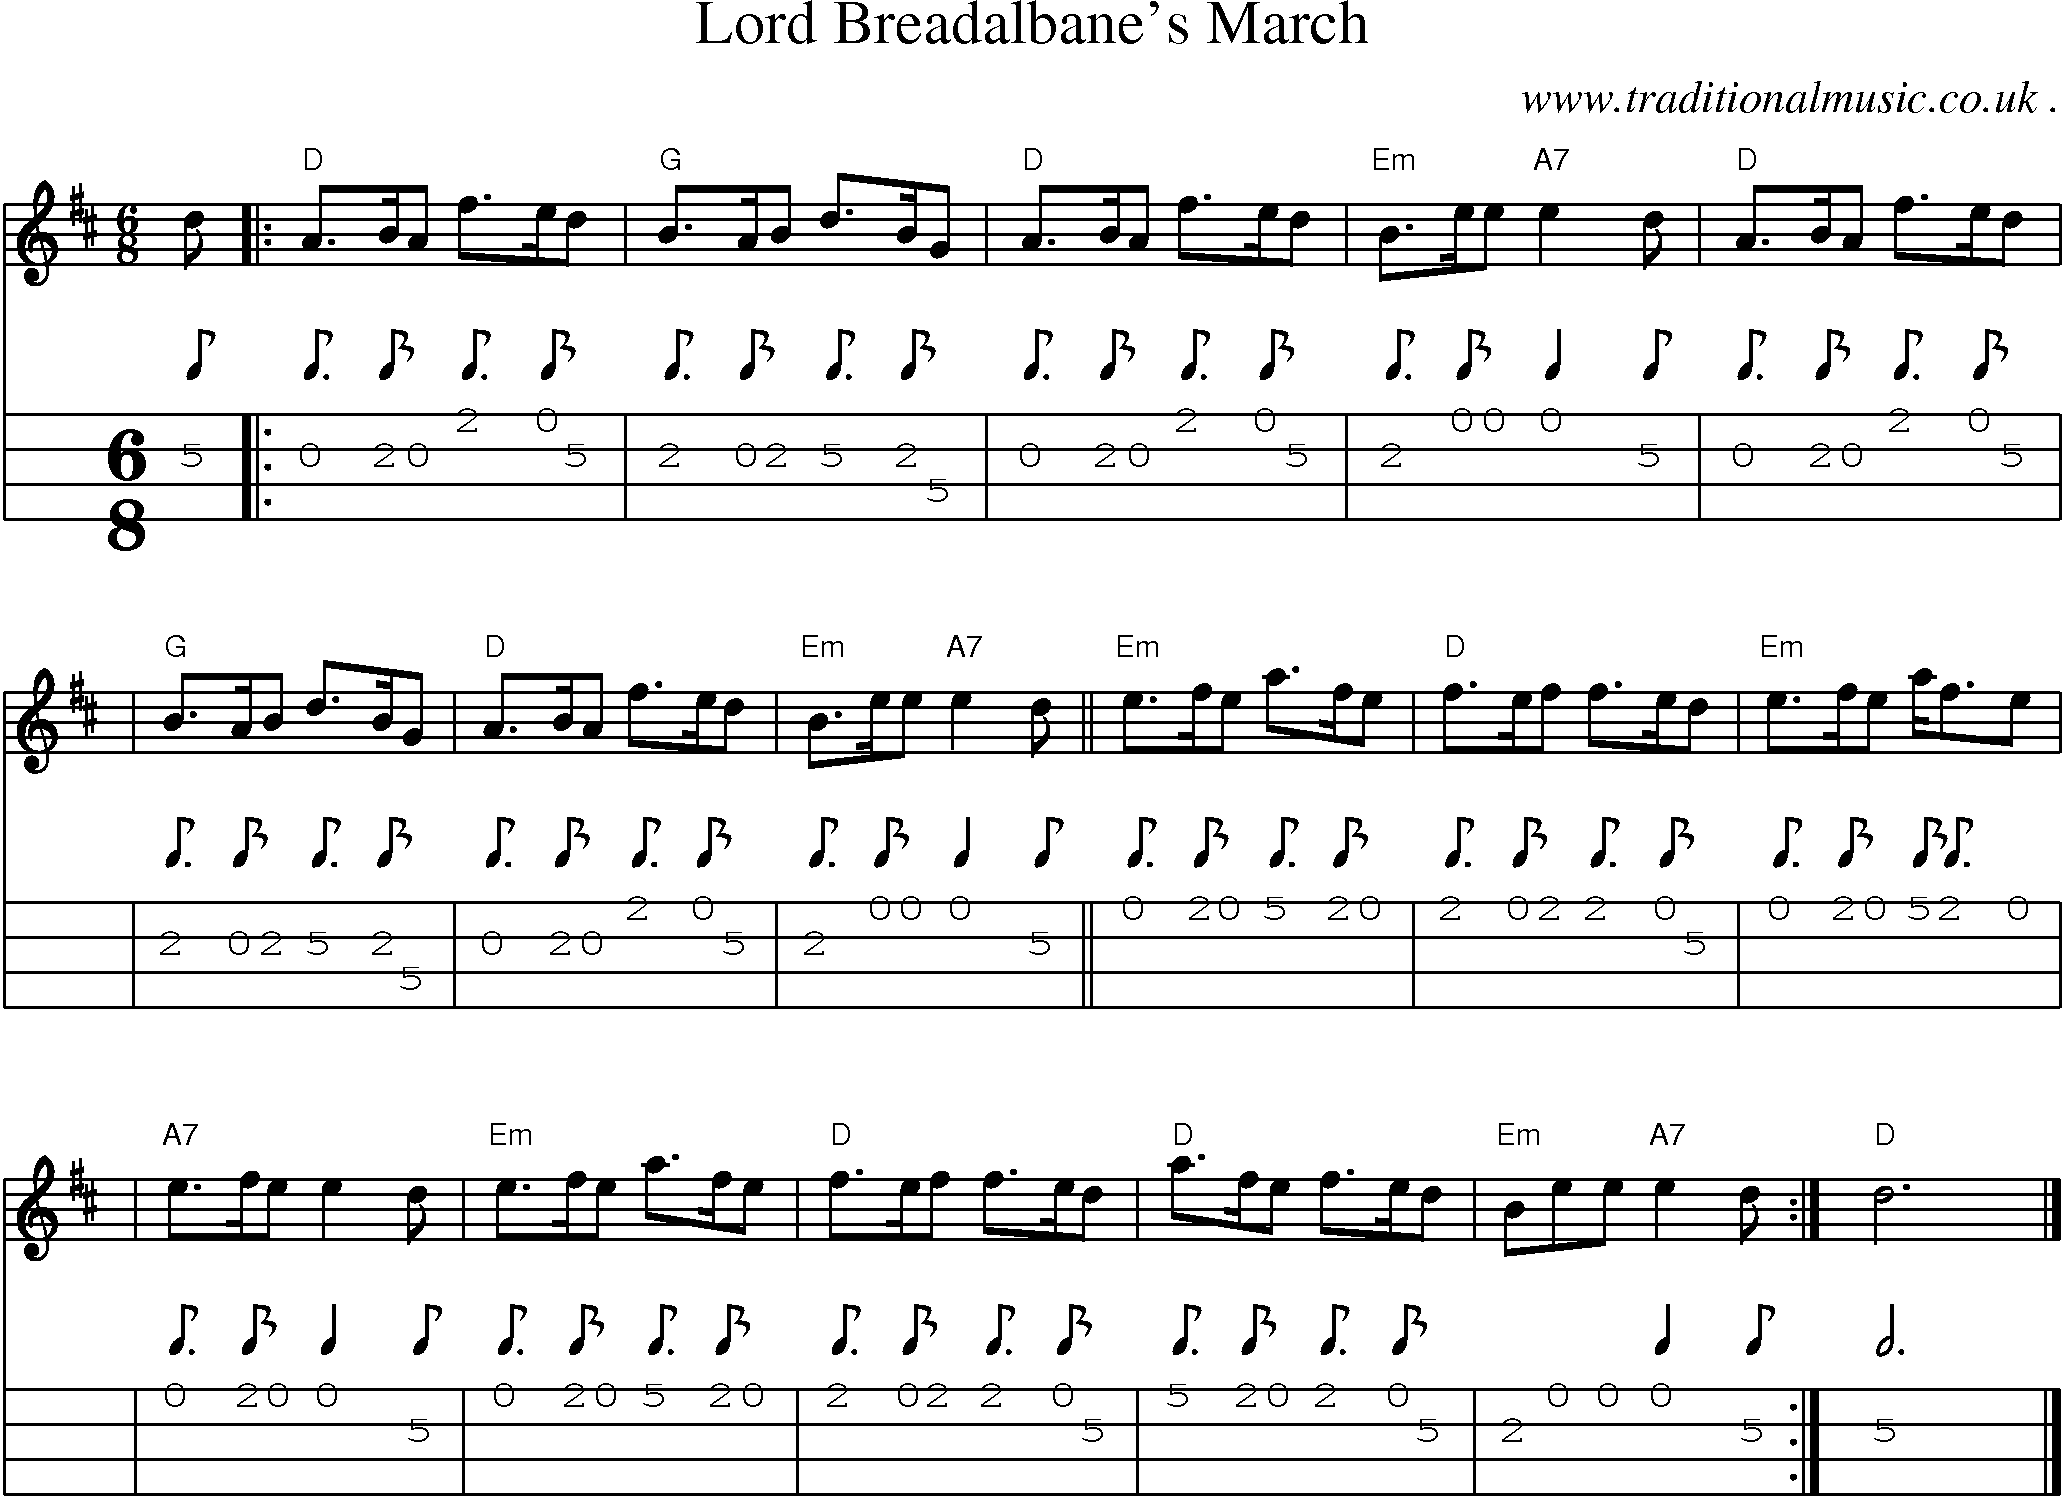 Sheet-music  score, Chords and Mandolin Tabs for Lord Breadalbanes March